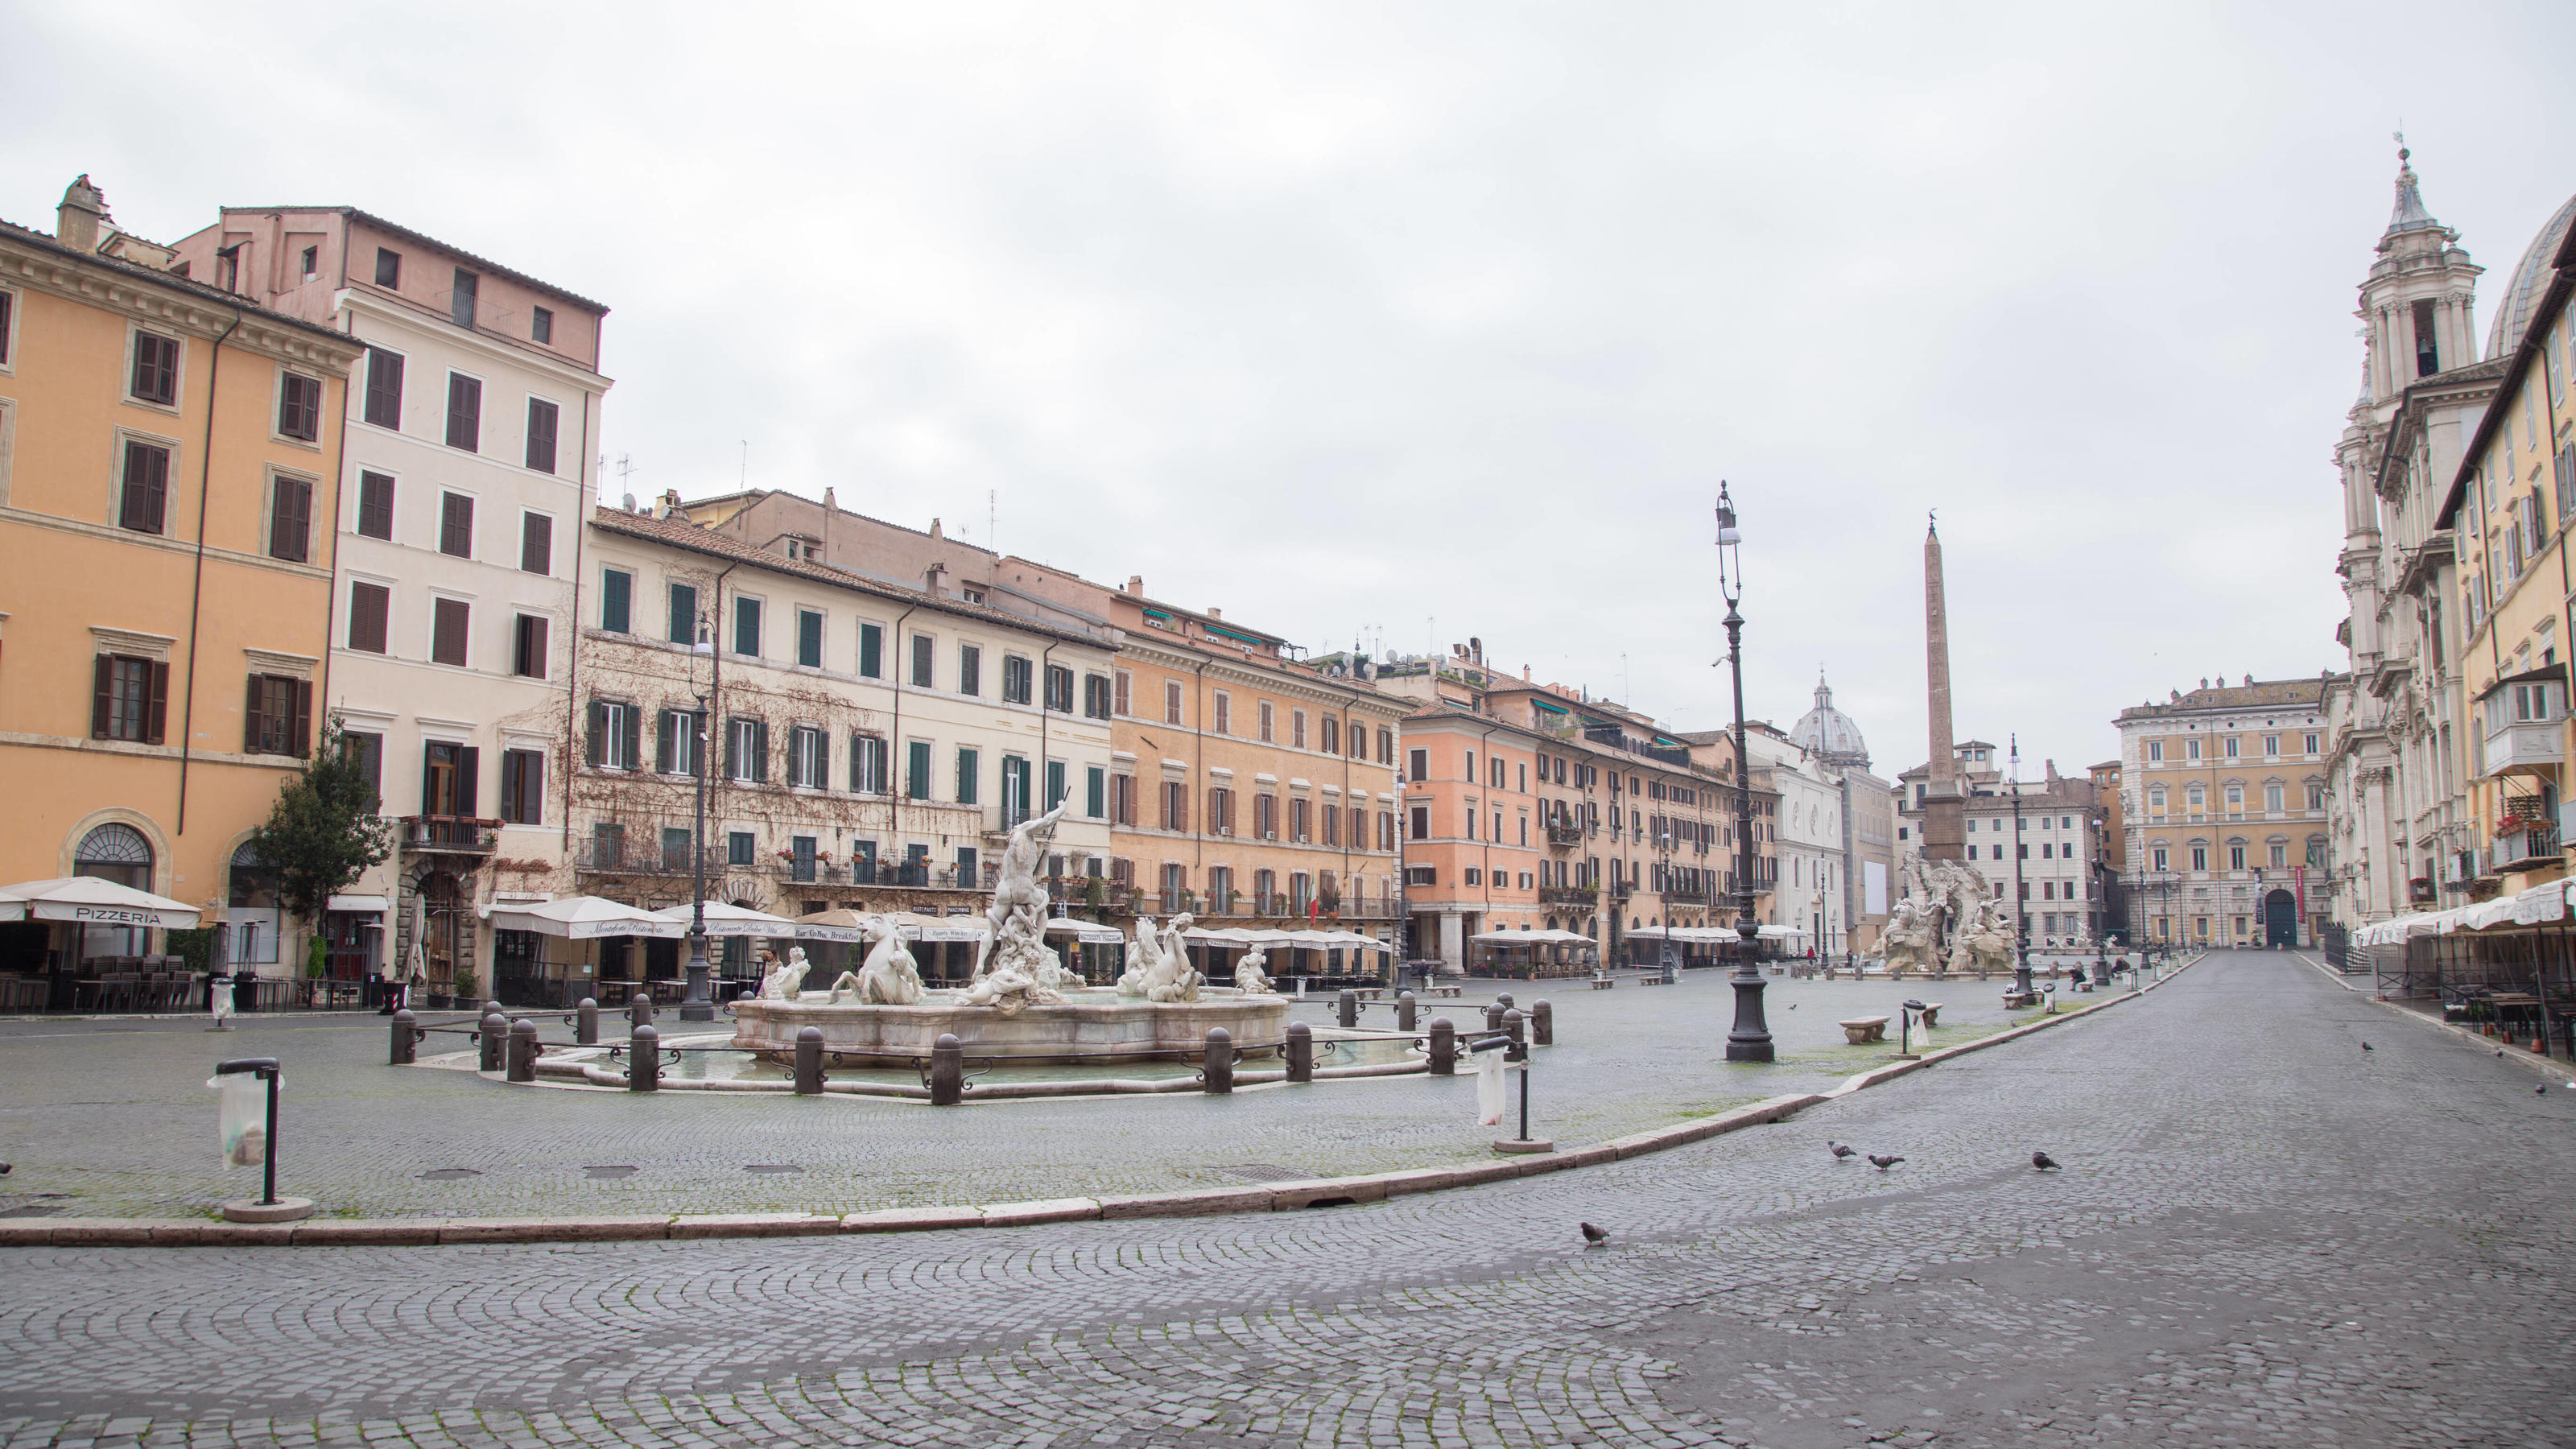  Rome: Piazza Navona after March 11th Decree Piazza Navona without people with restaurants closed in Rome after the Italian Government Law Decree of 11 March 2020 Roma Italy Copyright: MatteoxNardone